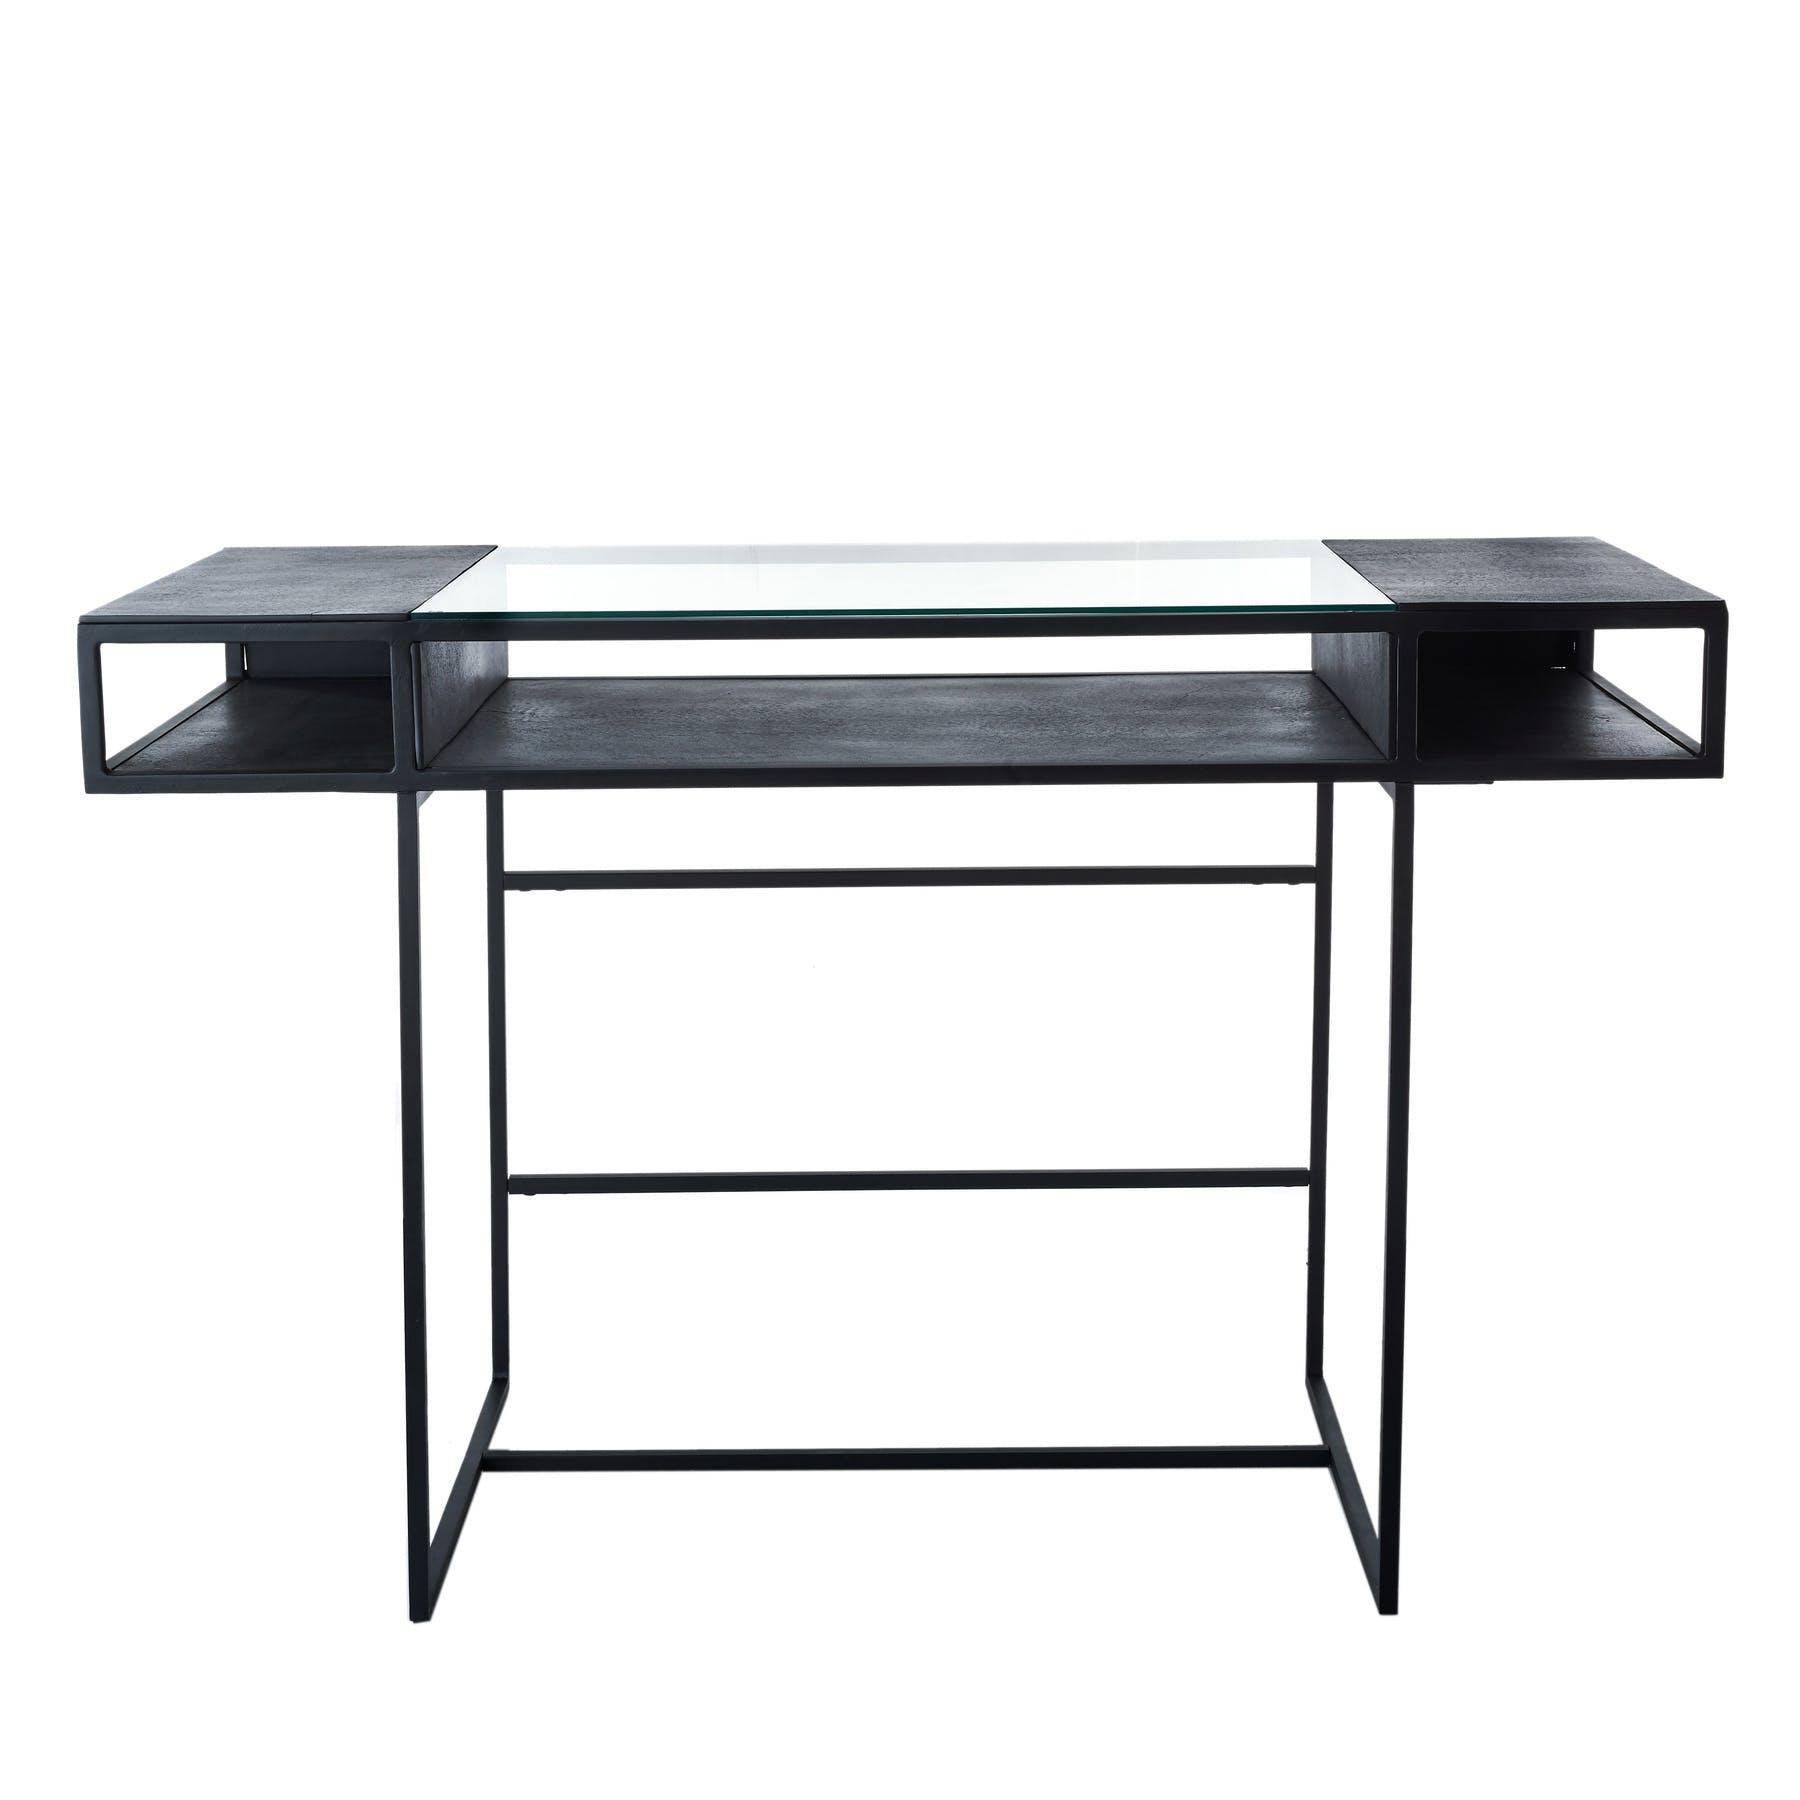 Graphite secretaire desk - Pols Potten Studio.
Dimensions: W119 x D59 x H75.5 cm.
Materials: Black powder coated iron frame, graphite plated aluminium top


Pols Potten products are characterised by a modern twist on Traditional Design. Each of